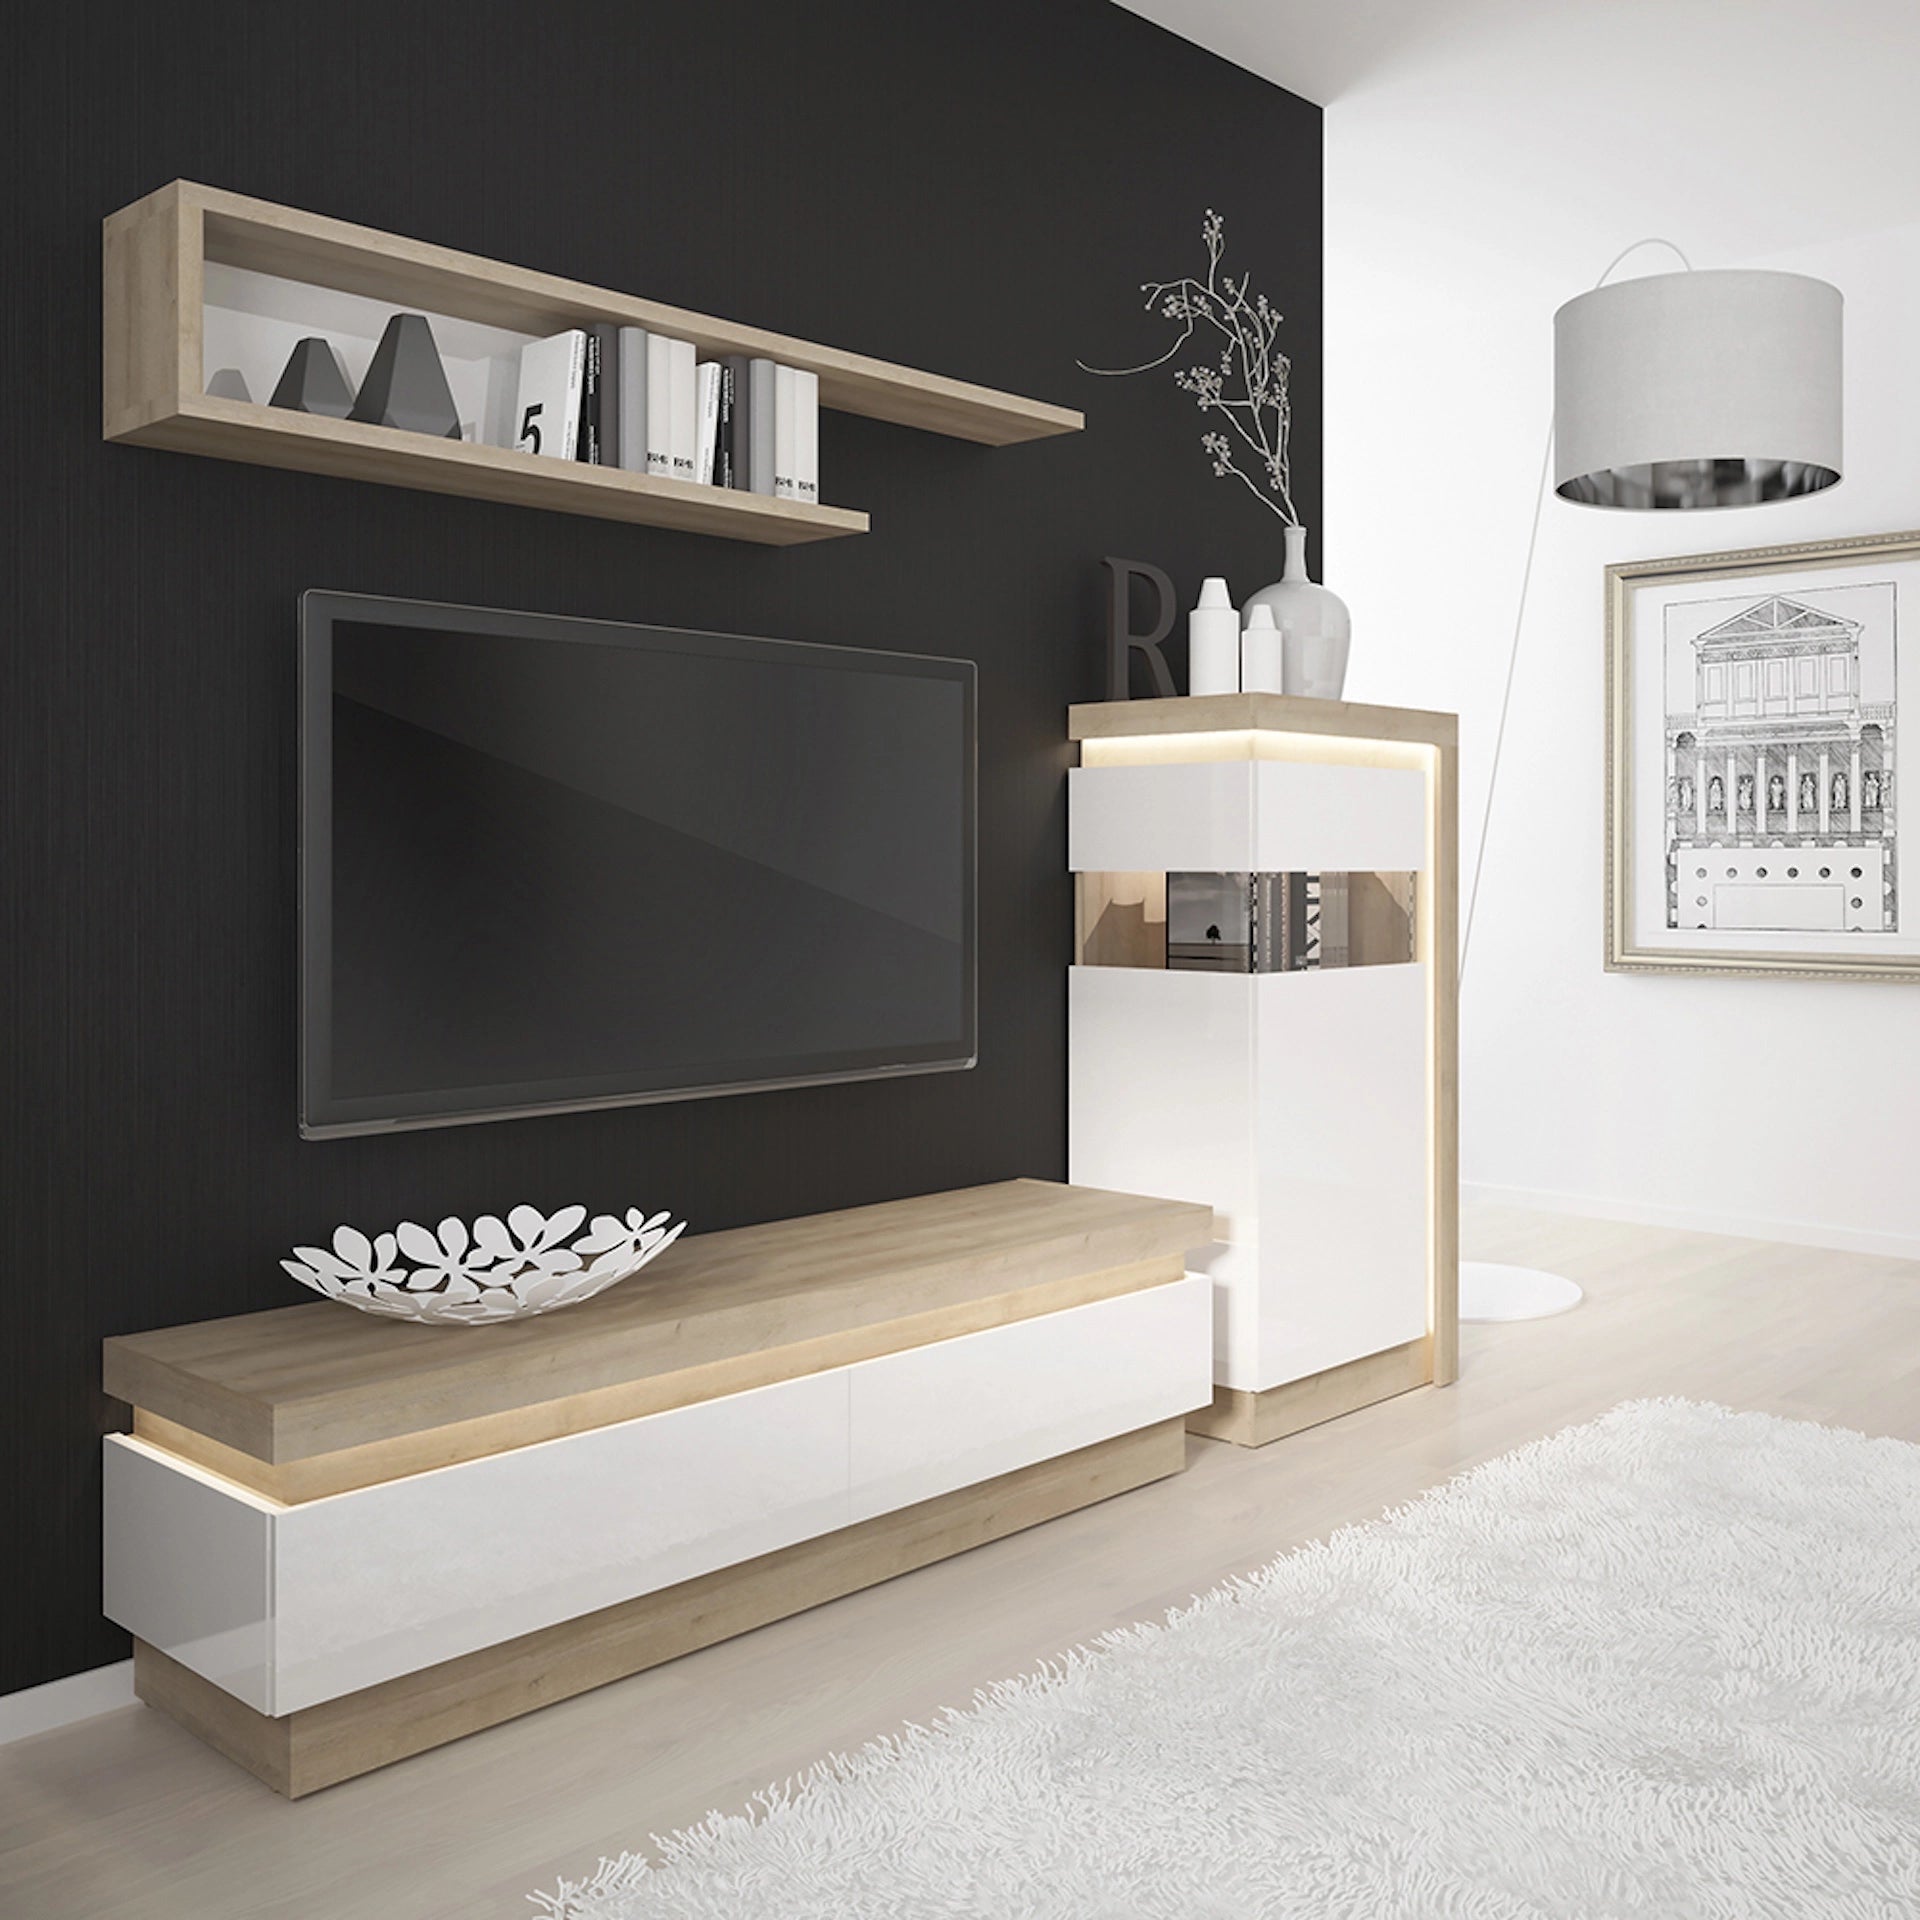 Furniture To Go Lyon 2 Drawer TV Cabinet in Riviera Oak/White High Gloss